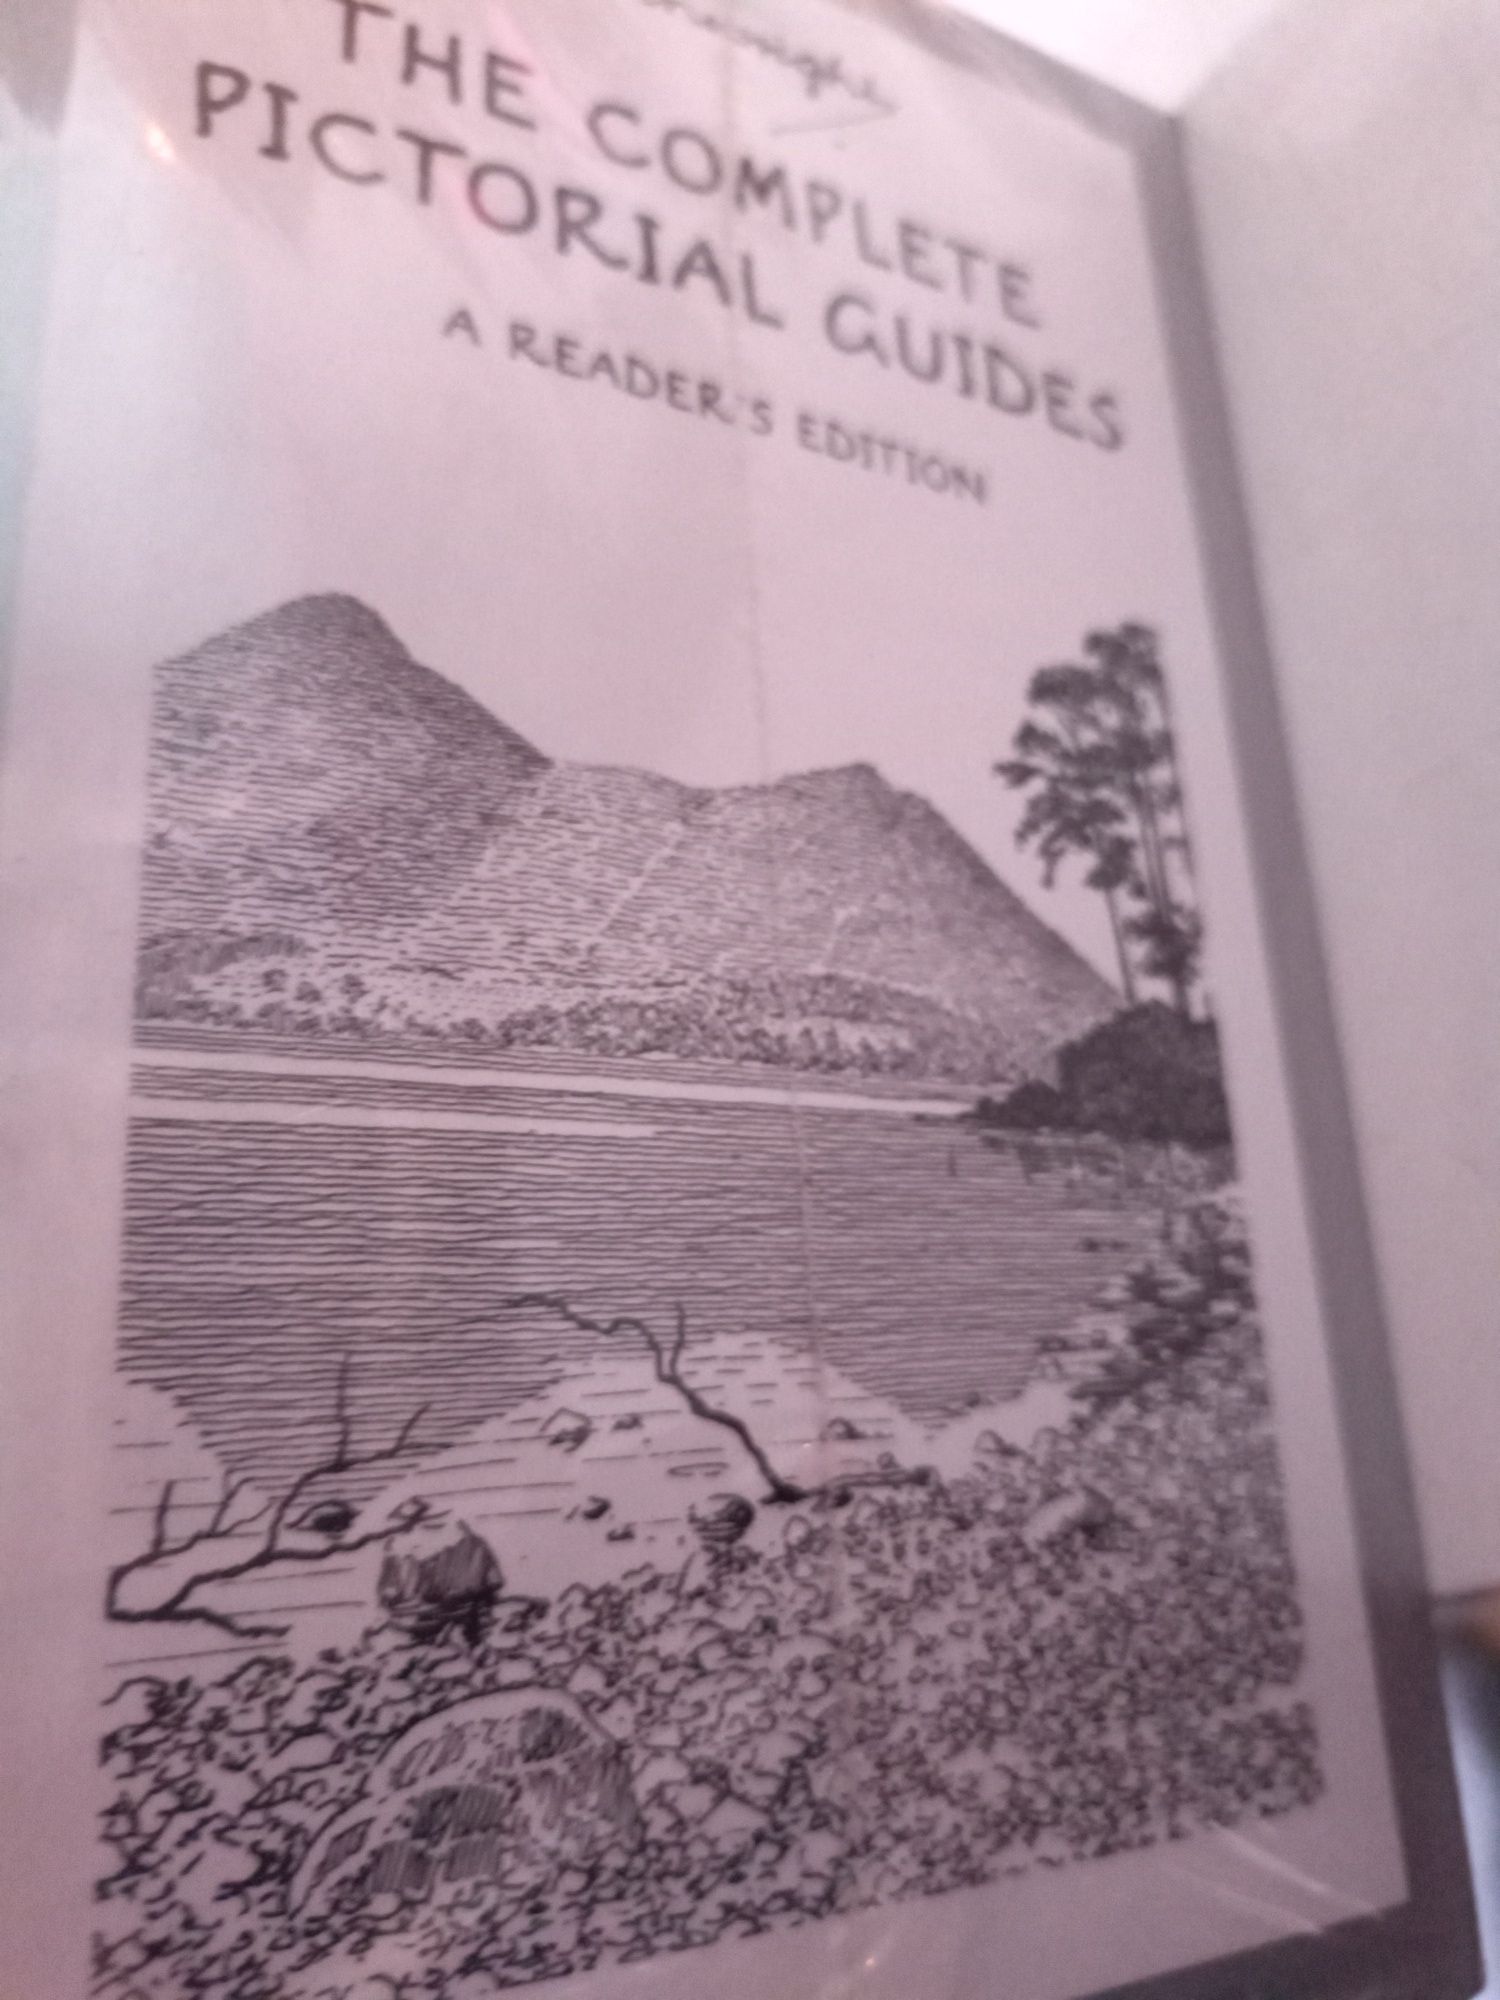 The Complete Pictorial Guides A Reader's Edition box Alfred Wainwright